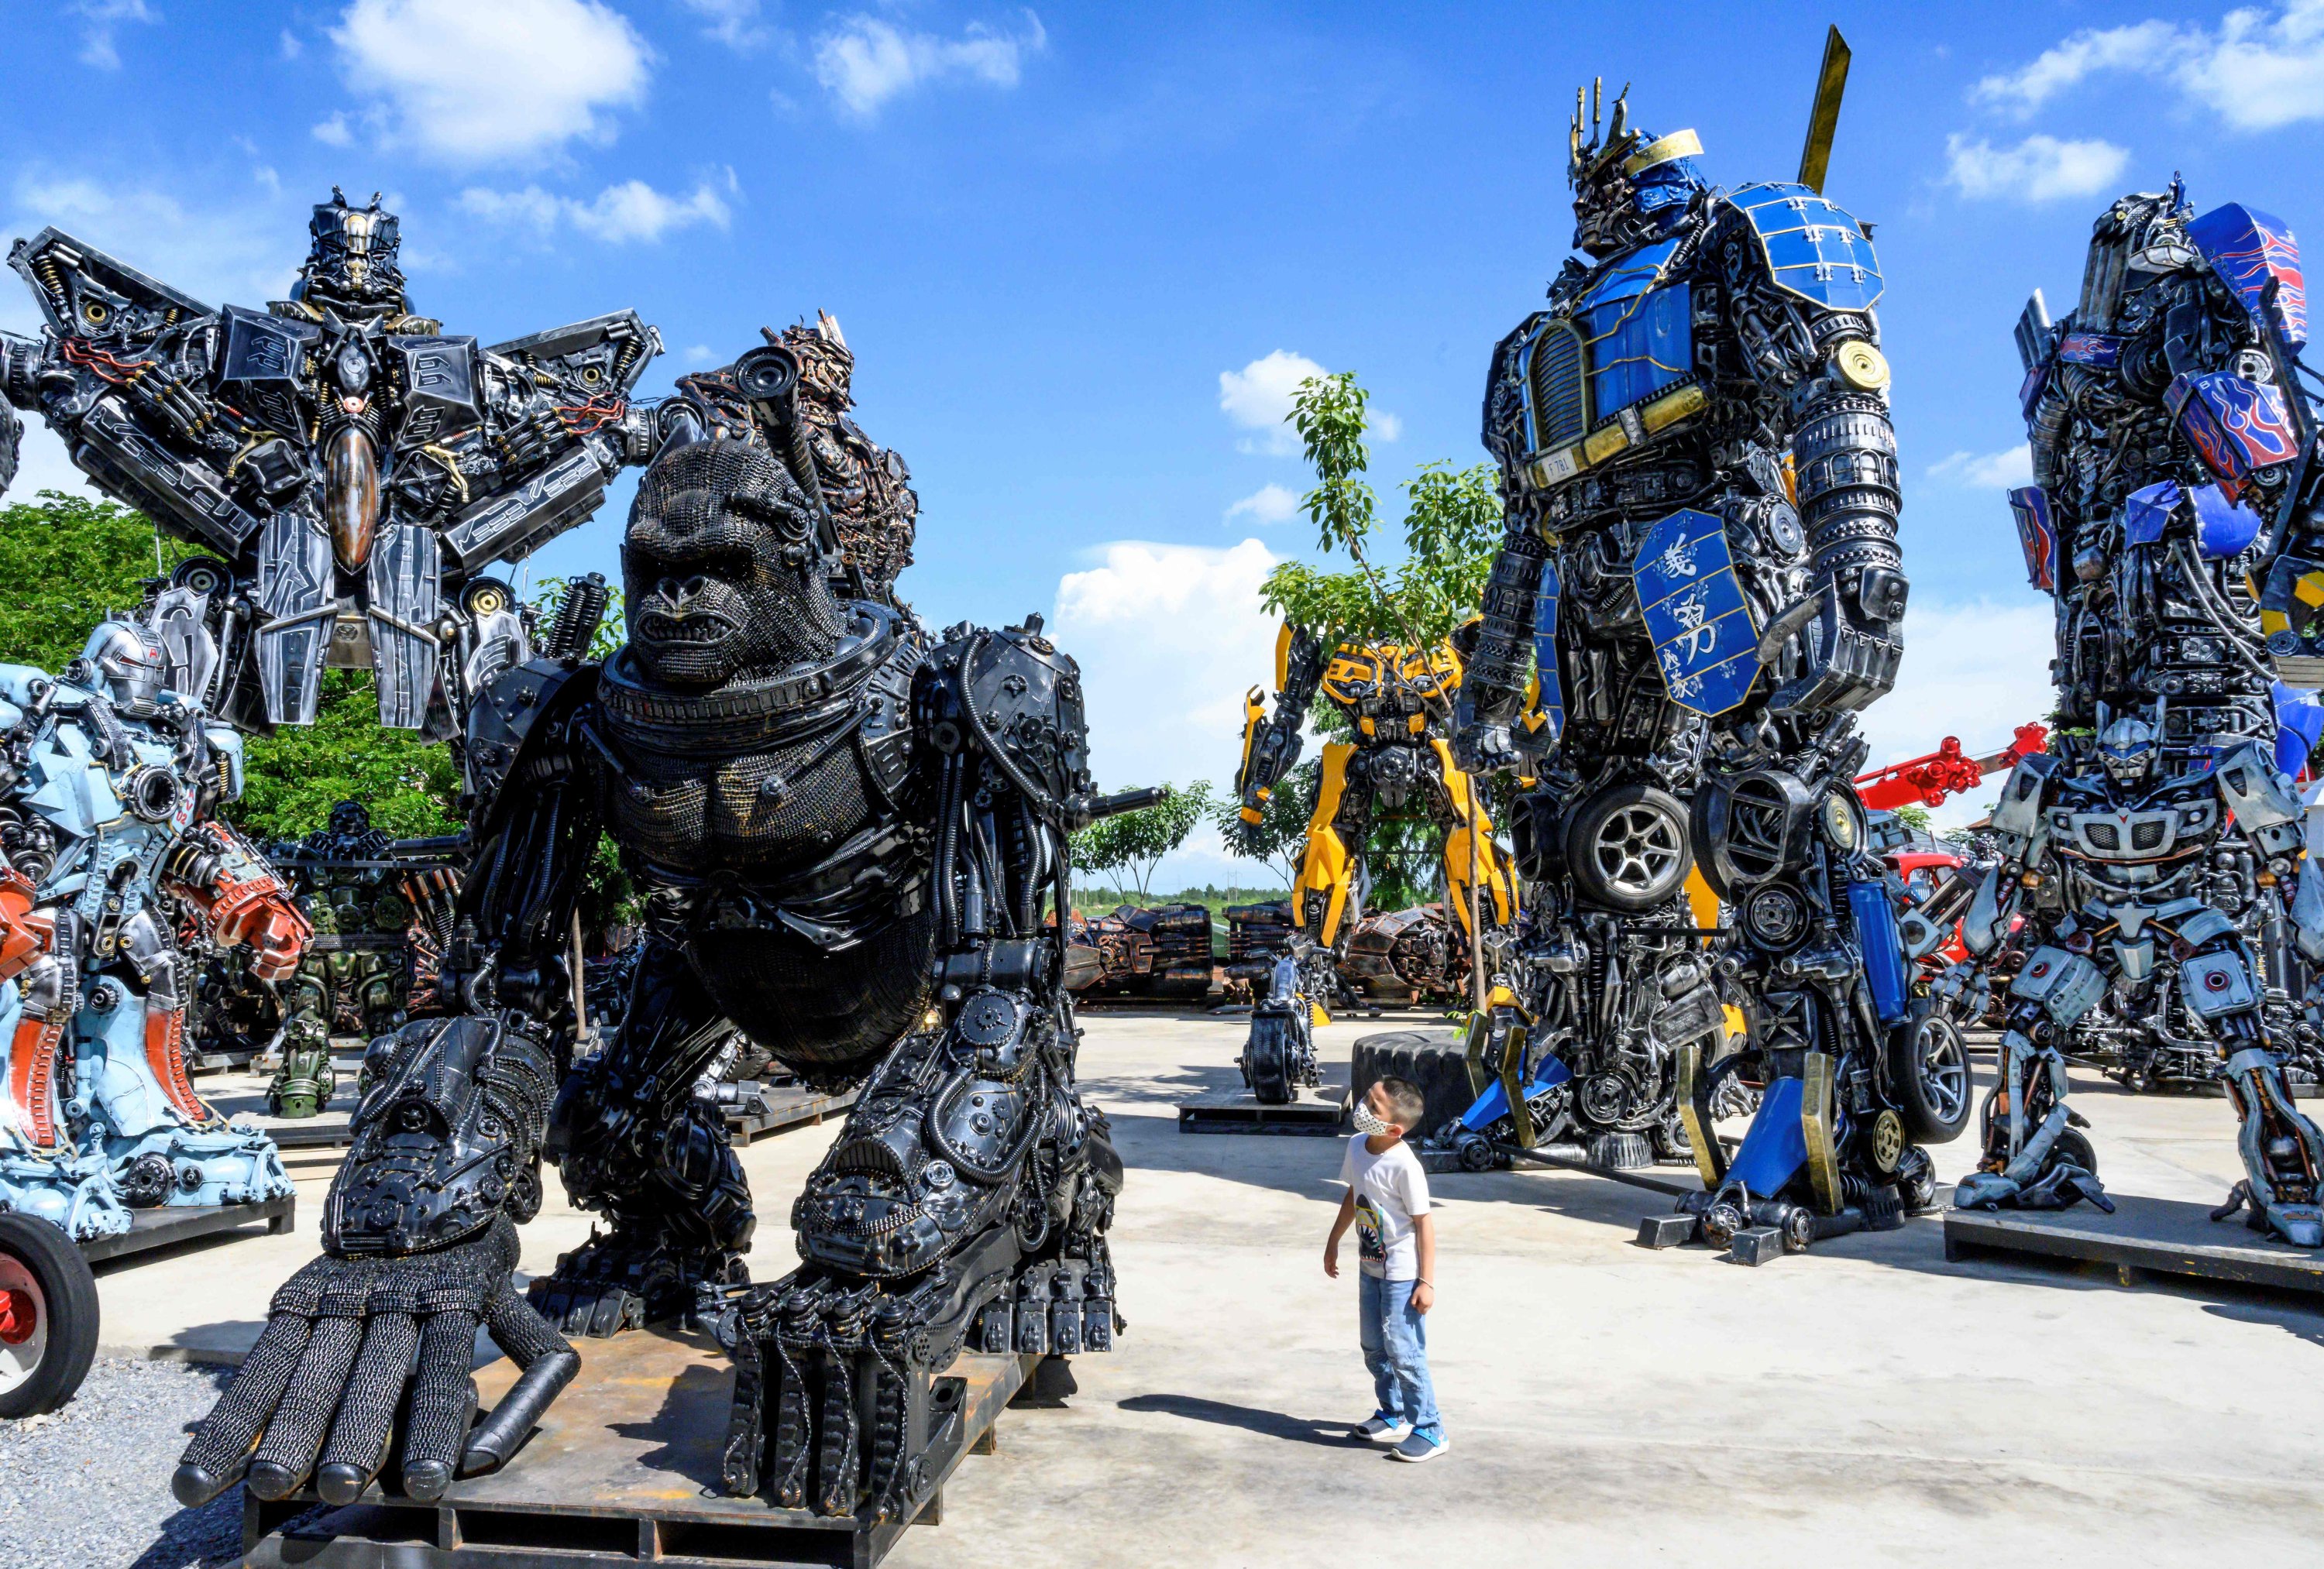 A child looks at a figure of King Kong in front of life-sized sculptures of characters from the "Transformers" film franchise, all made of scrap metal parts, at the Ban Hun Lek museum in Ang Thong, Thailand, July 18, 2020. (AFP PHOTO)